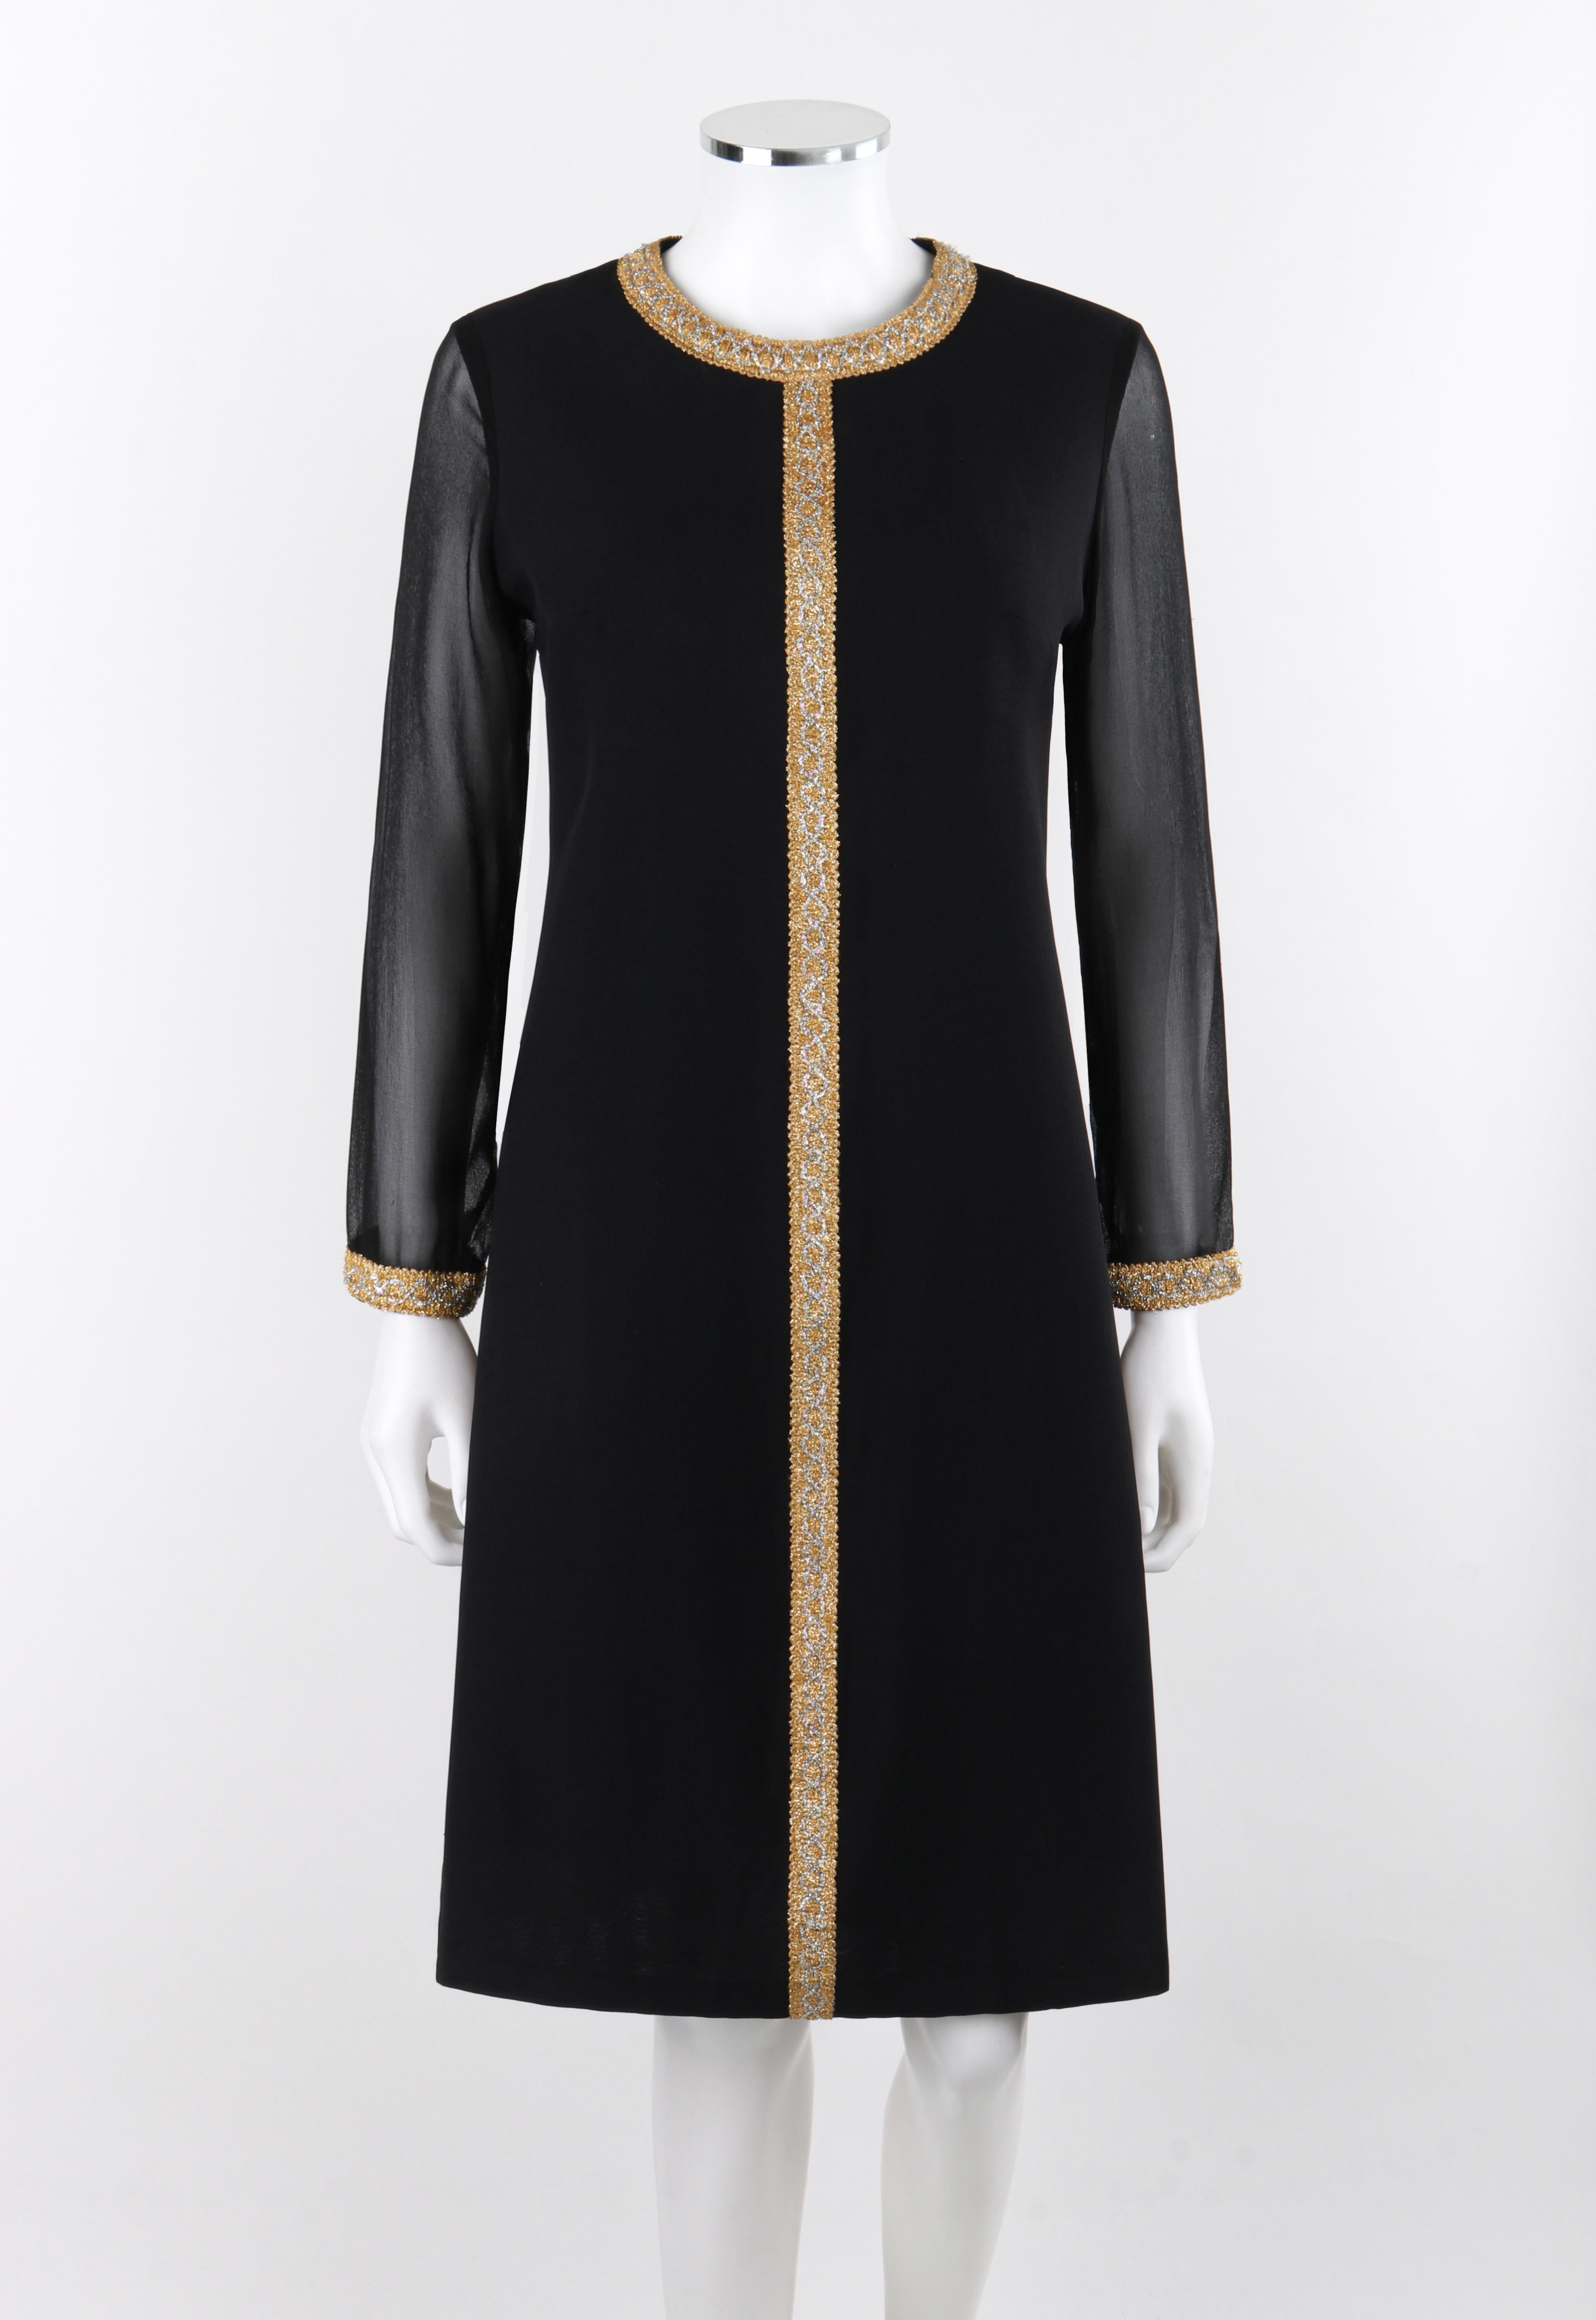 GLORIA SWANSON Puritan Forever Young c. 1960's Black Gold Sheer Sleeve Dress VTG

Marque / Fabricant : Puritan Forever Young
Circa : 1960
Concepteur : Gloria Swanson
Style : Robe de cocktail
Couleur(s) : Noir, Or/argent (accents.)
Doublée :